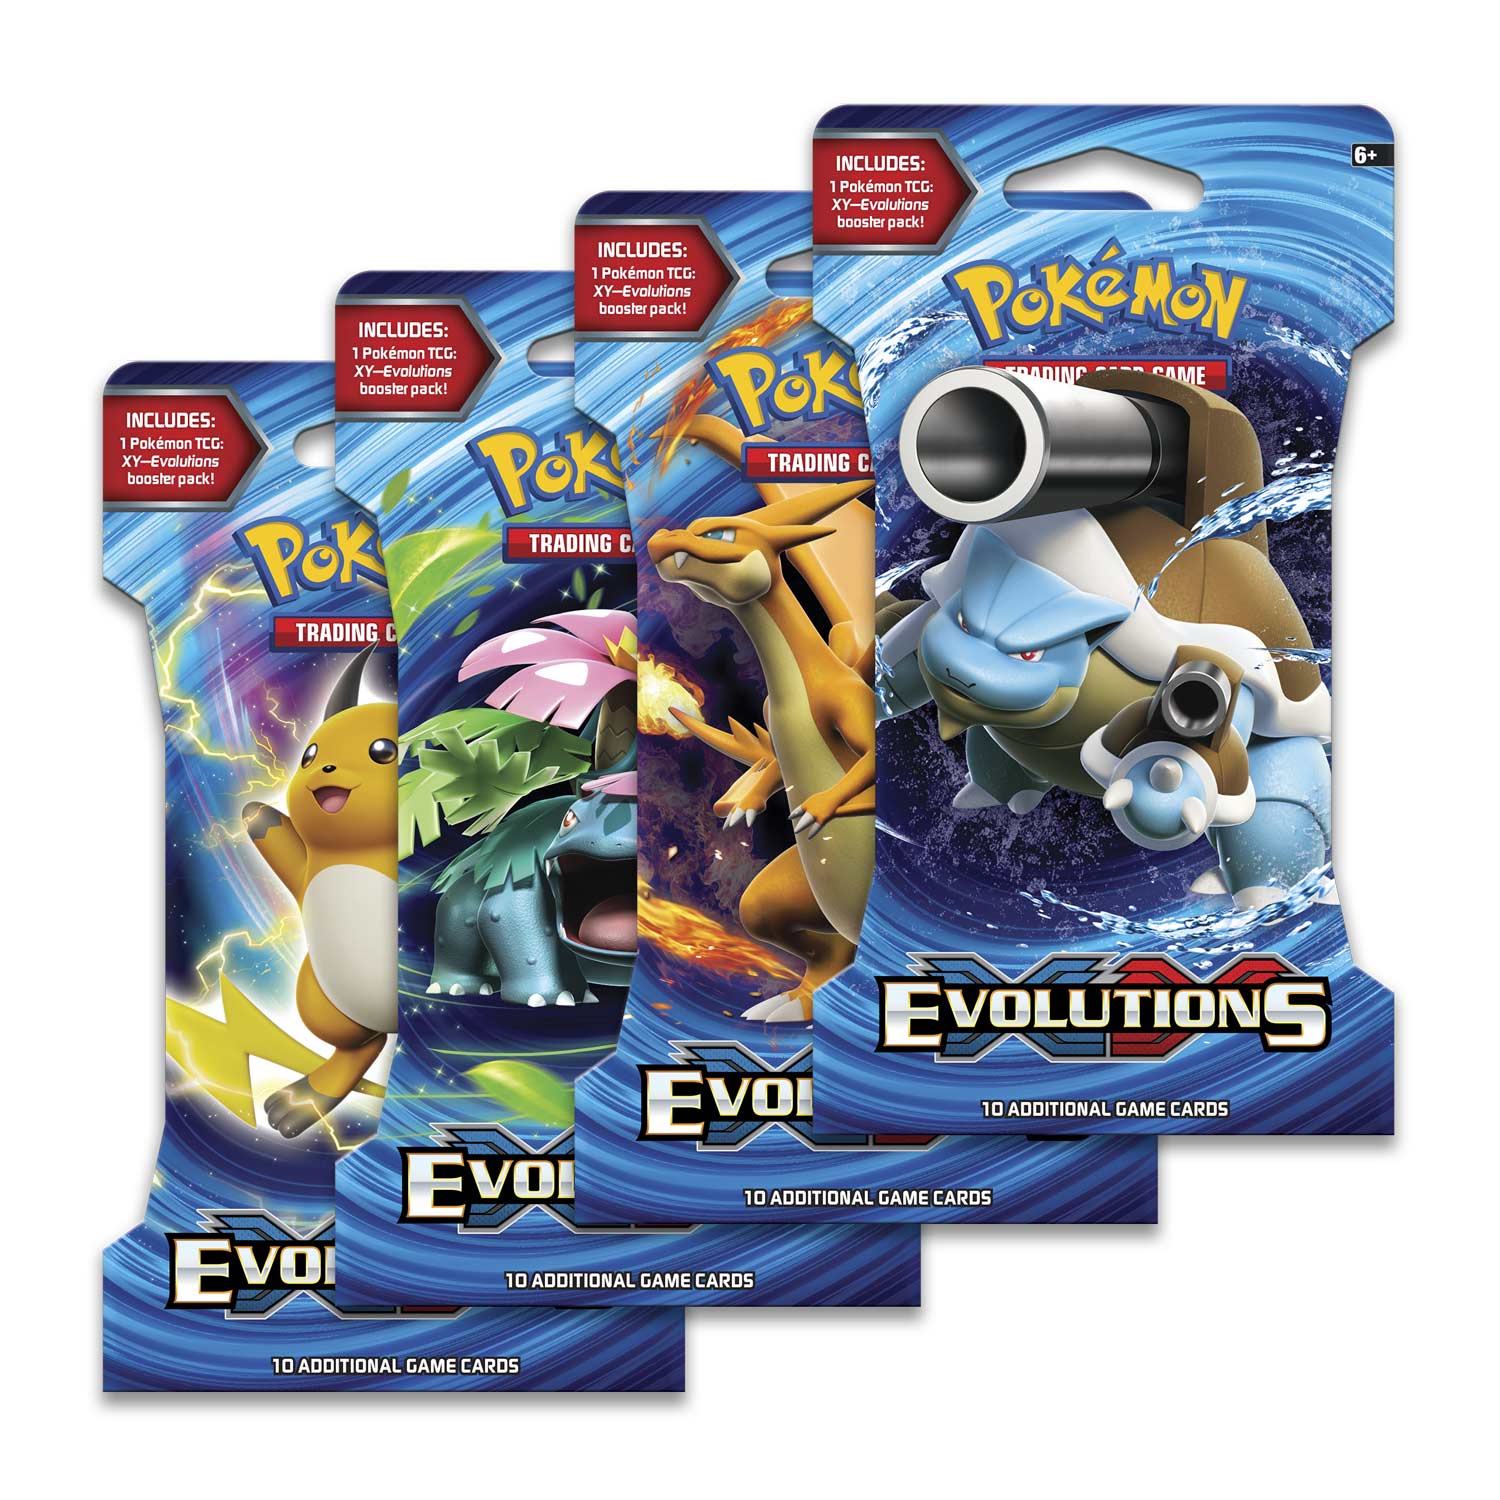 10 Card Packs & 3 Card Packs ===> XY Evolutions 10 New Pokemon Packs Unweighed 